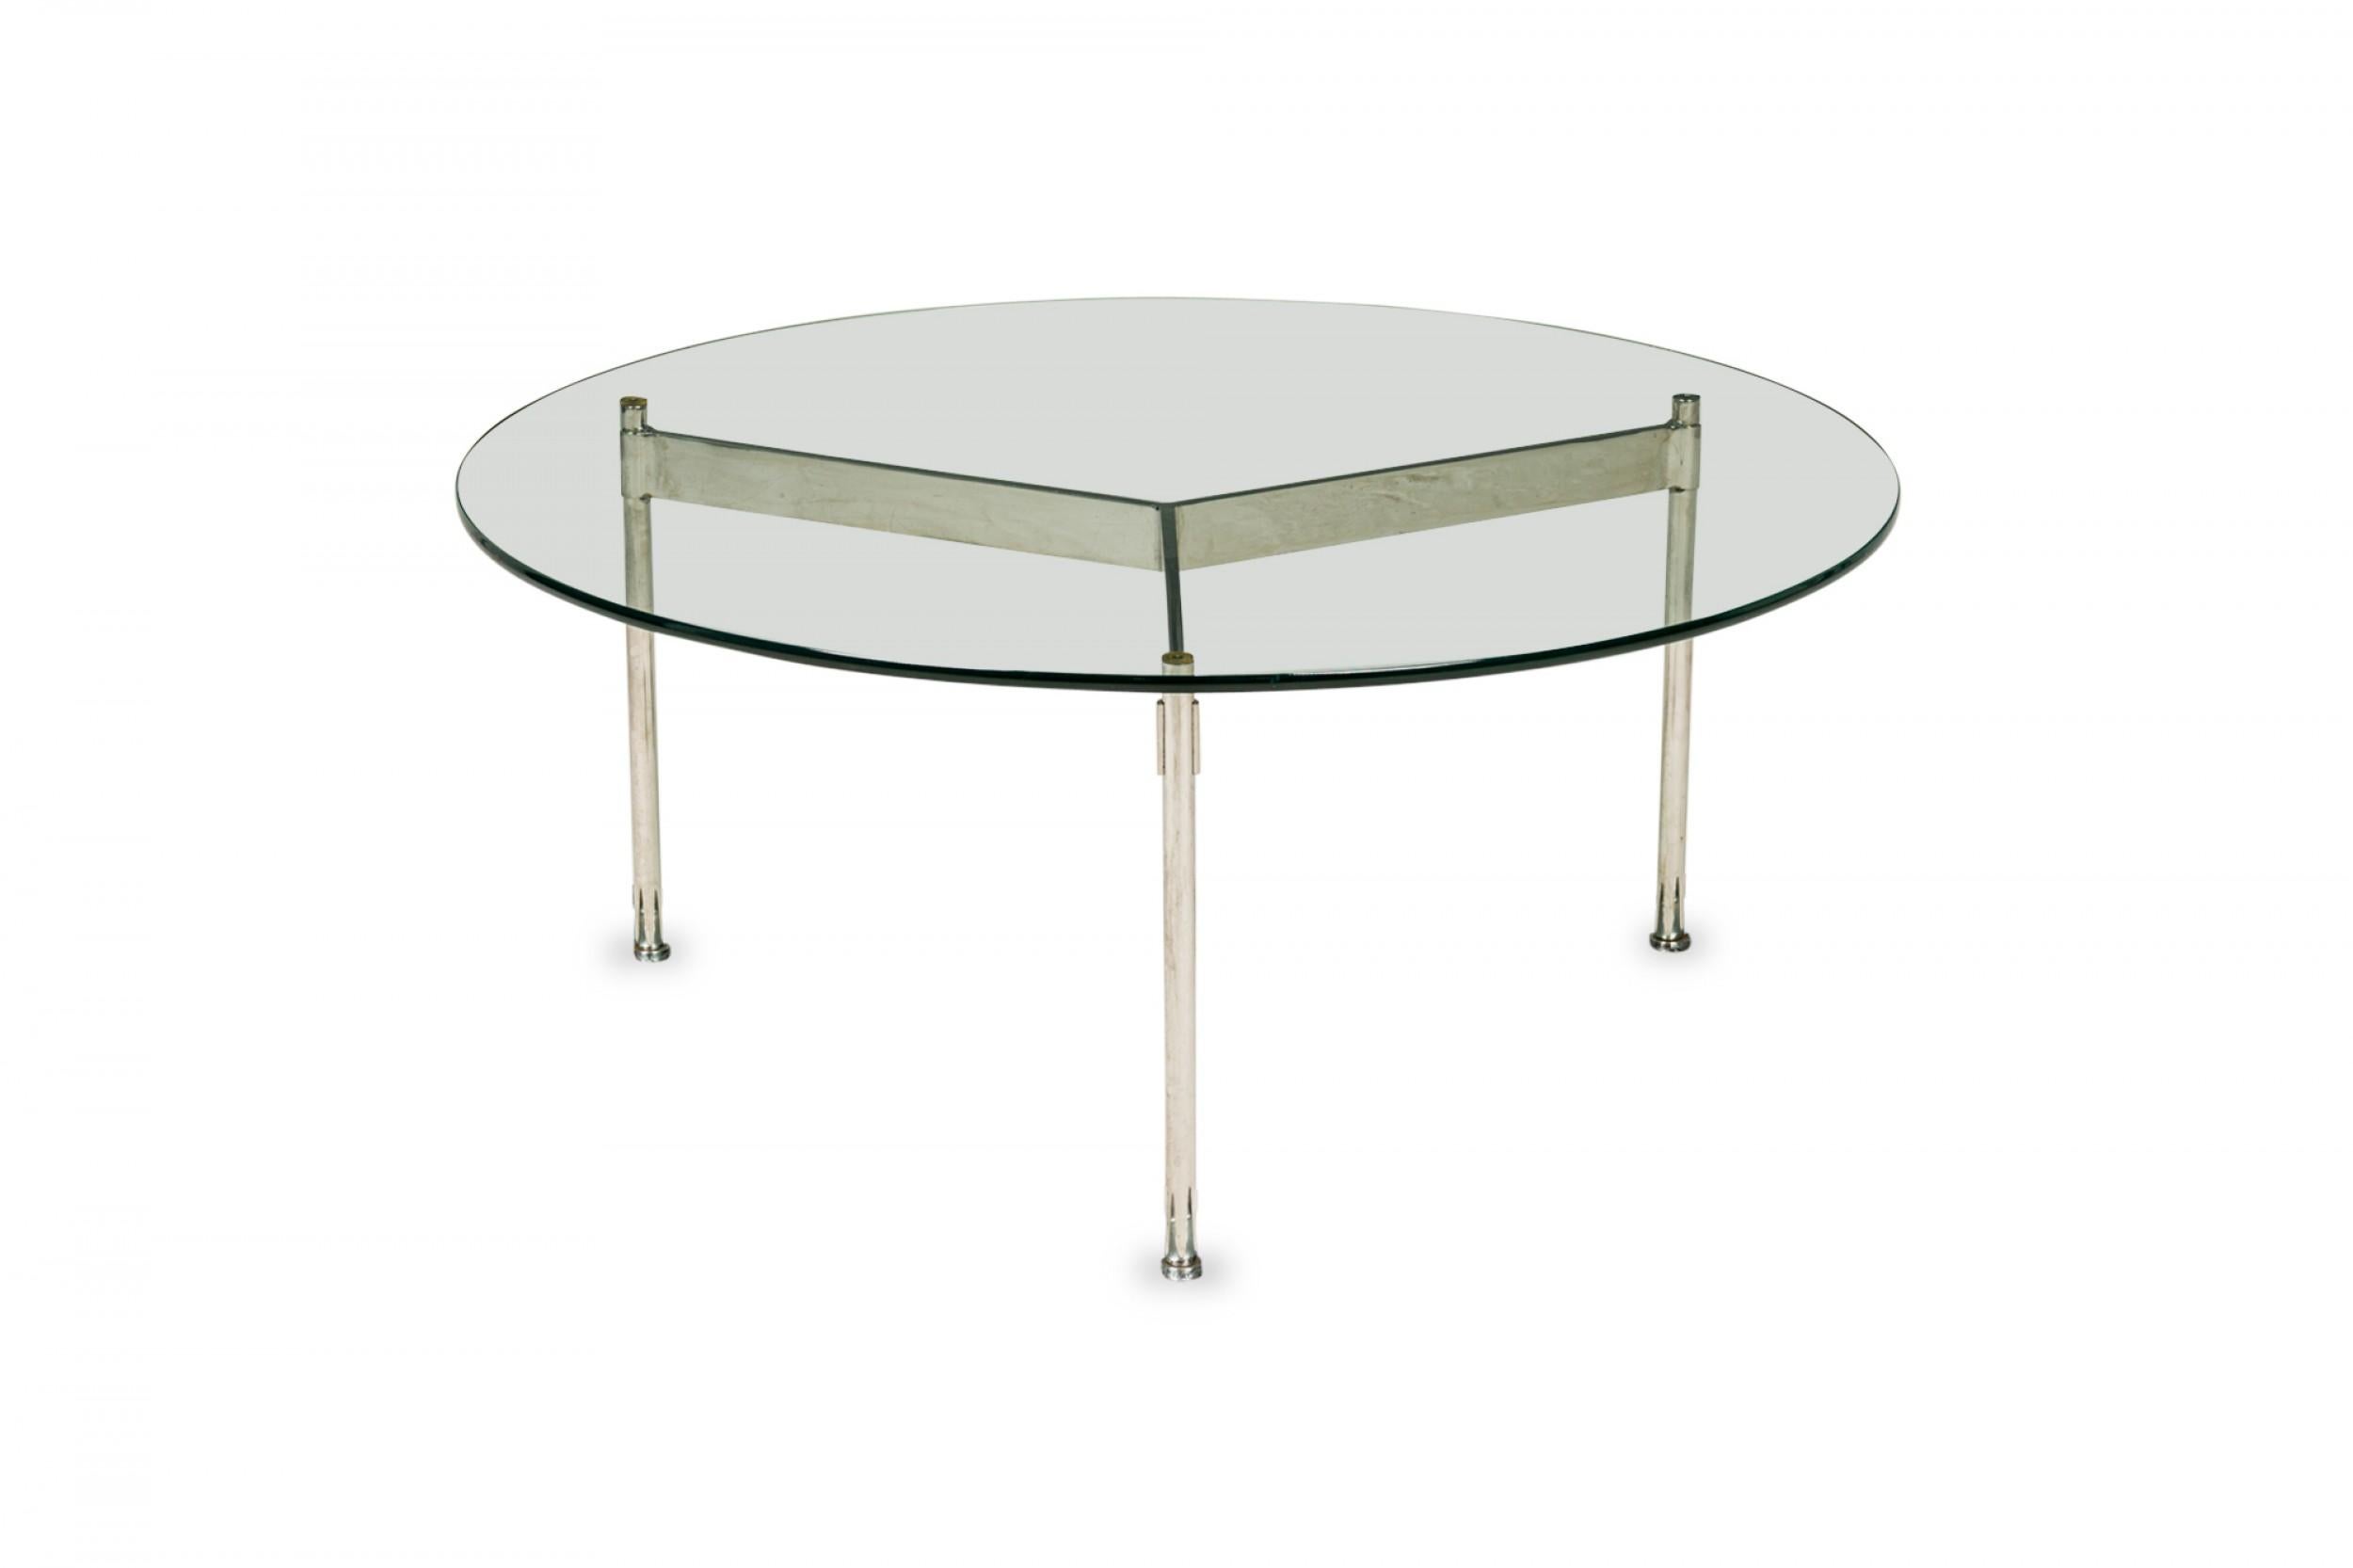 American Mid-Century round coffee / cocktail table with a circular clear glass top resting on a three bar chrome plated steel base. (WARD BENNETT)
